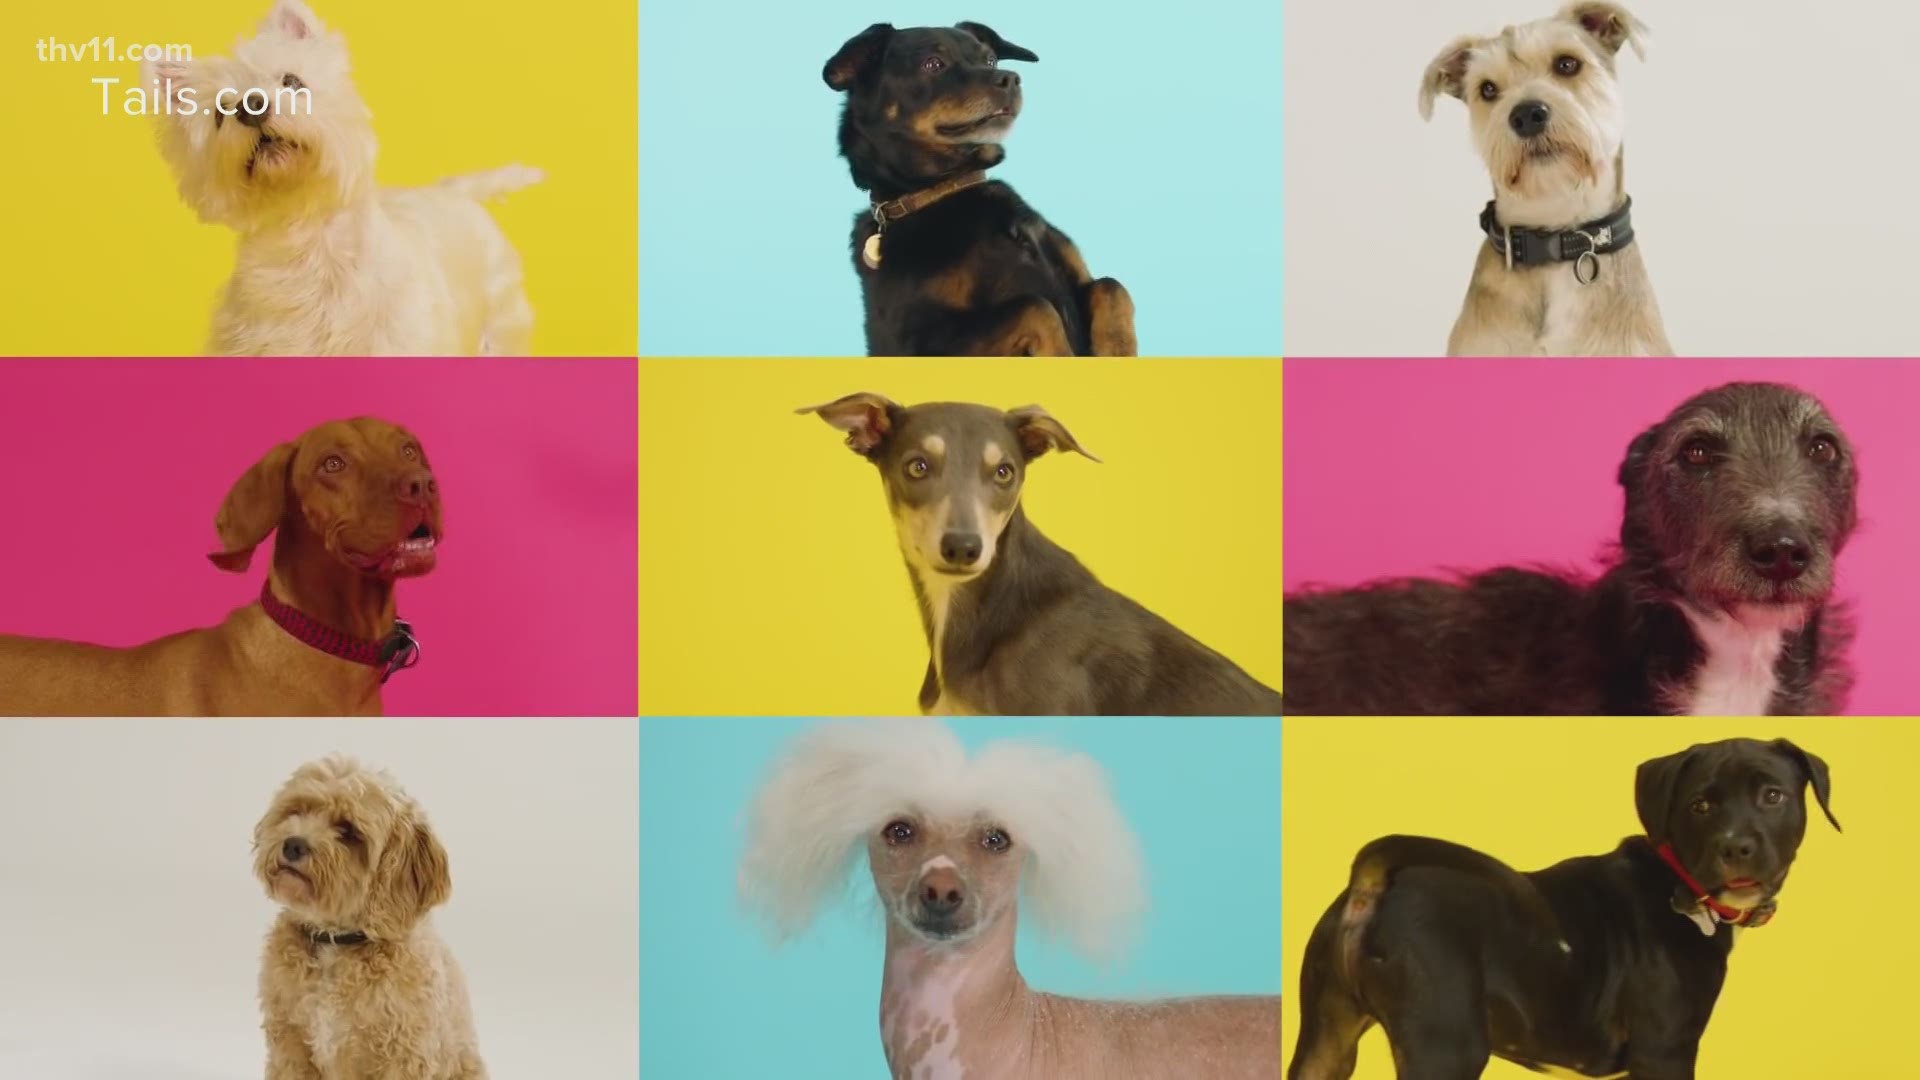 Dog food company tails.com has created the first Christmas song just for dogs. 'Raise the Woof' includes barking sounds, squeaky toys, a doorbell and more.